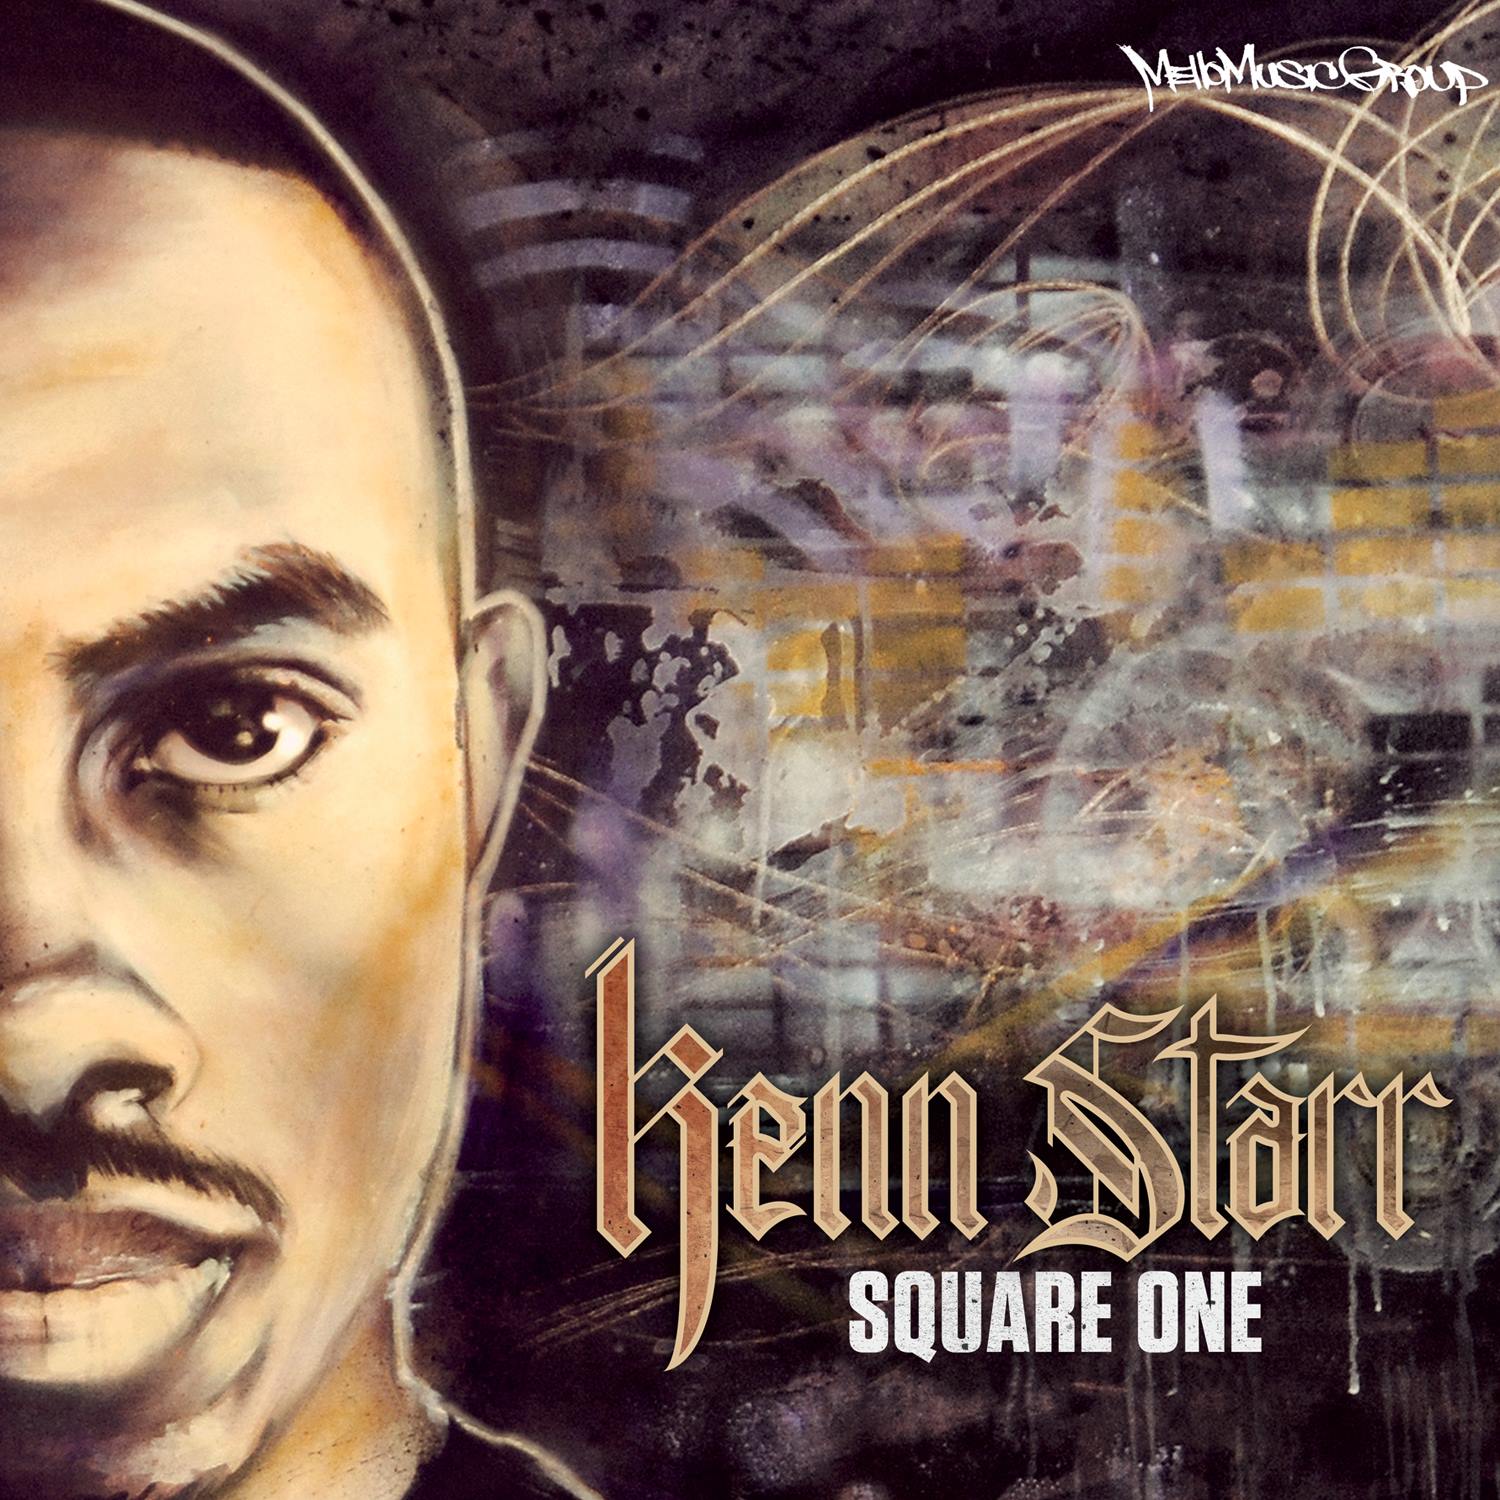 Kenn Starr — “The Movement II” produced by Kev Brown